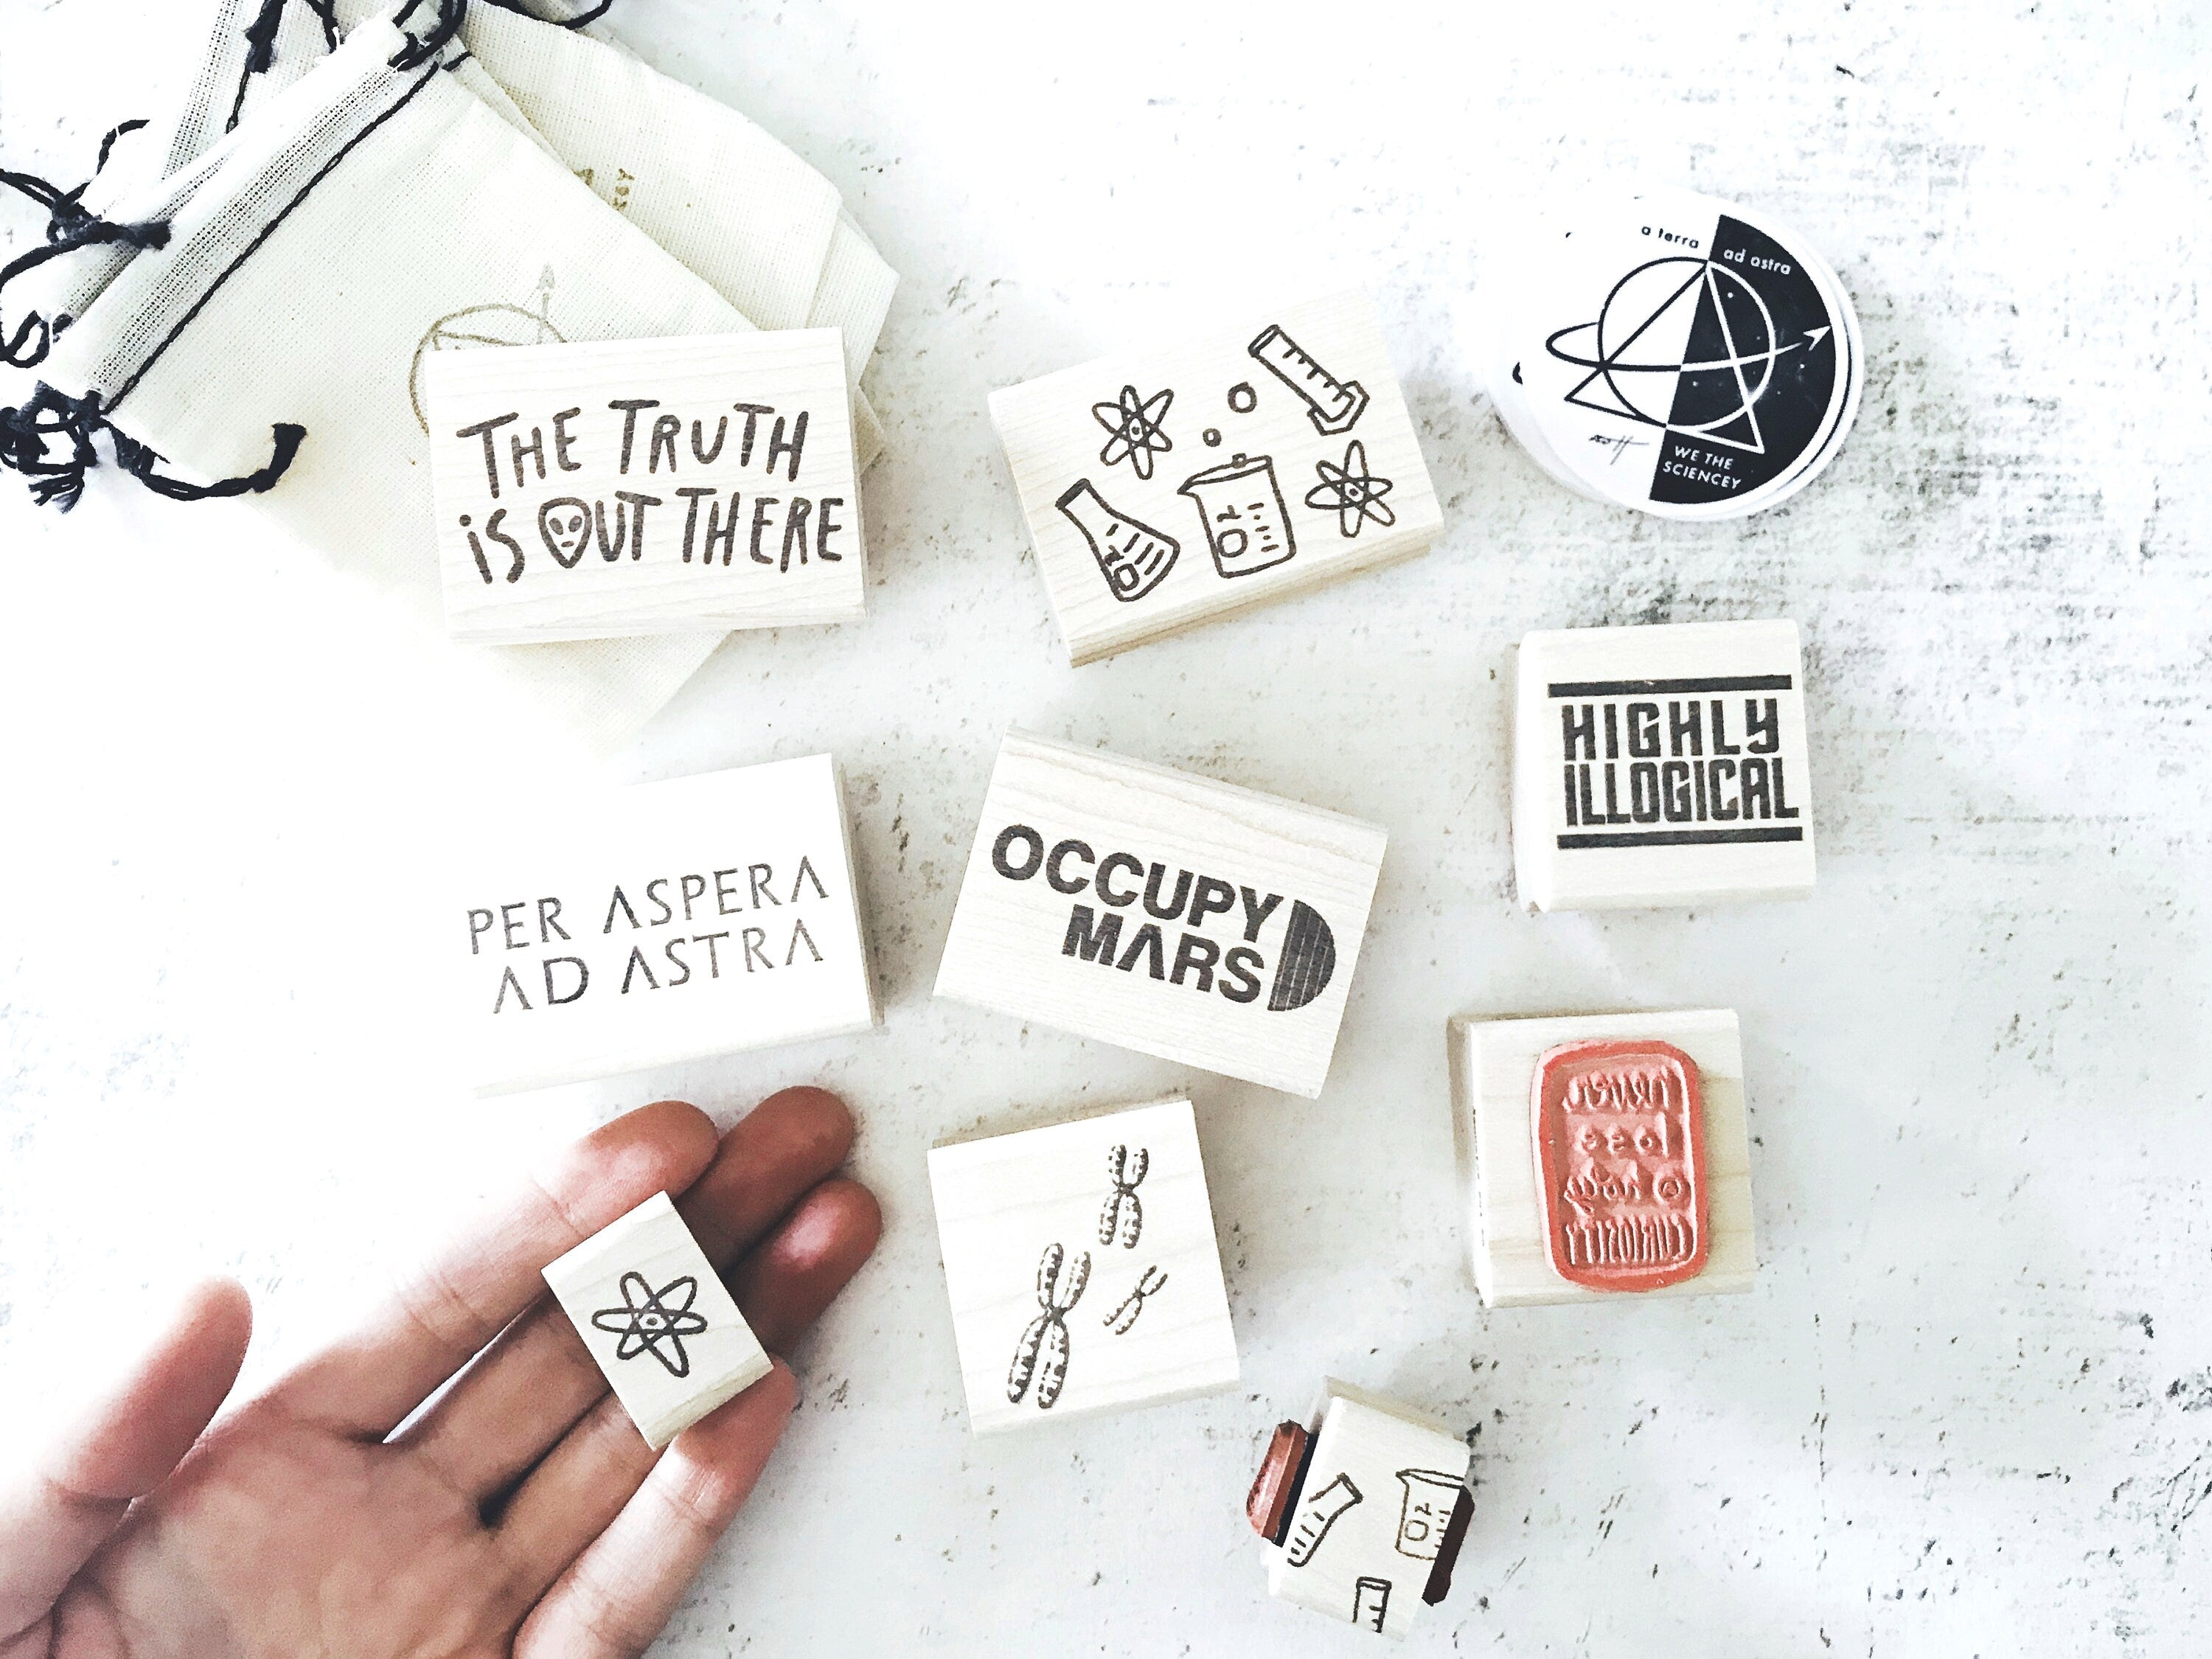 STEM Always Full Rubber Stamp - Inspirational / Motivational Quote Stamp - Science Teacher Stationery